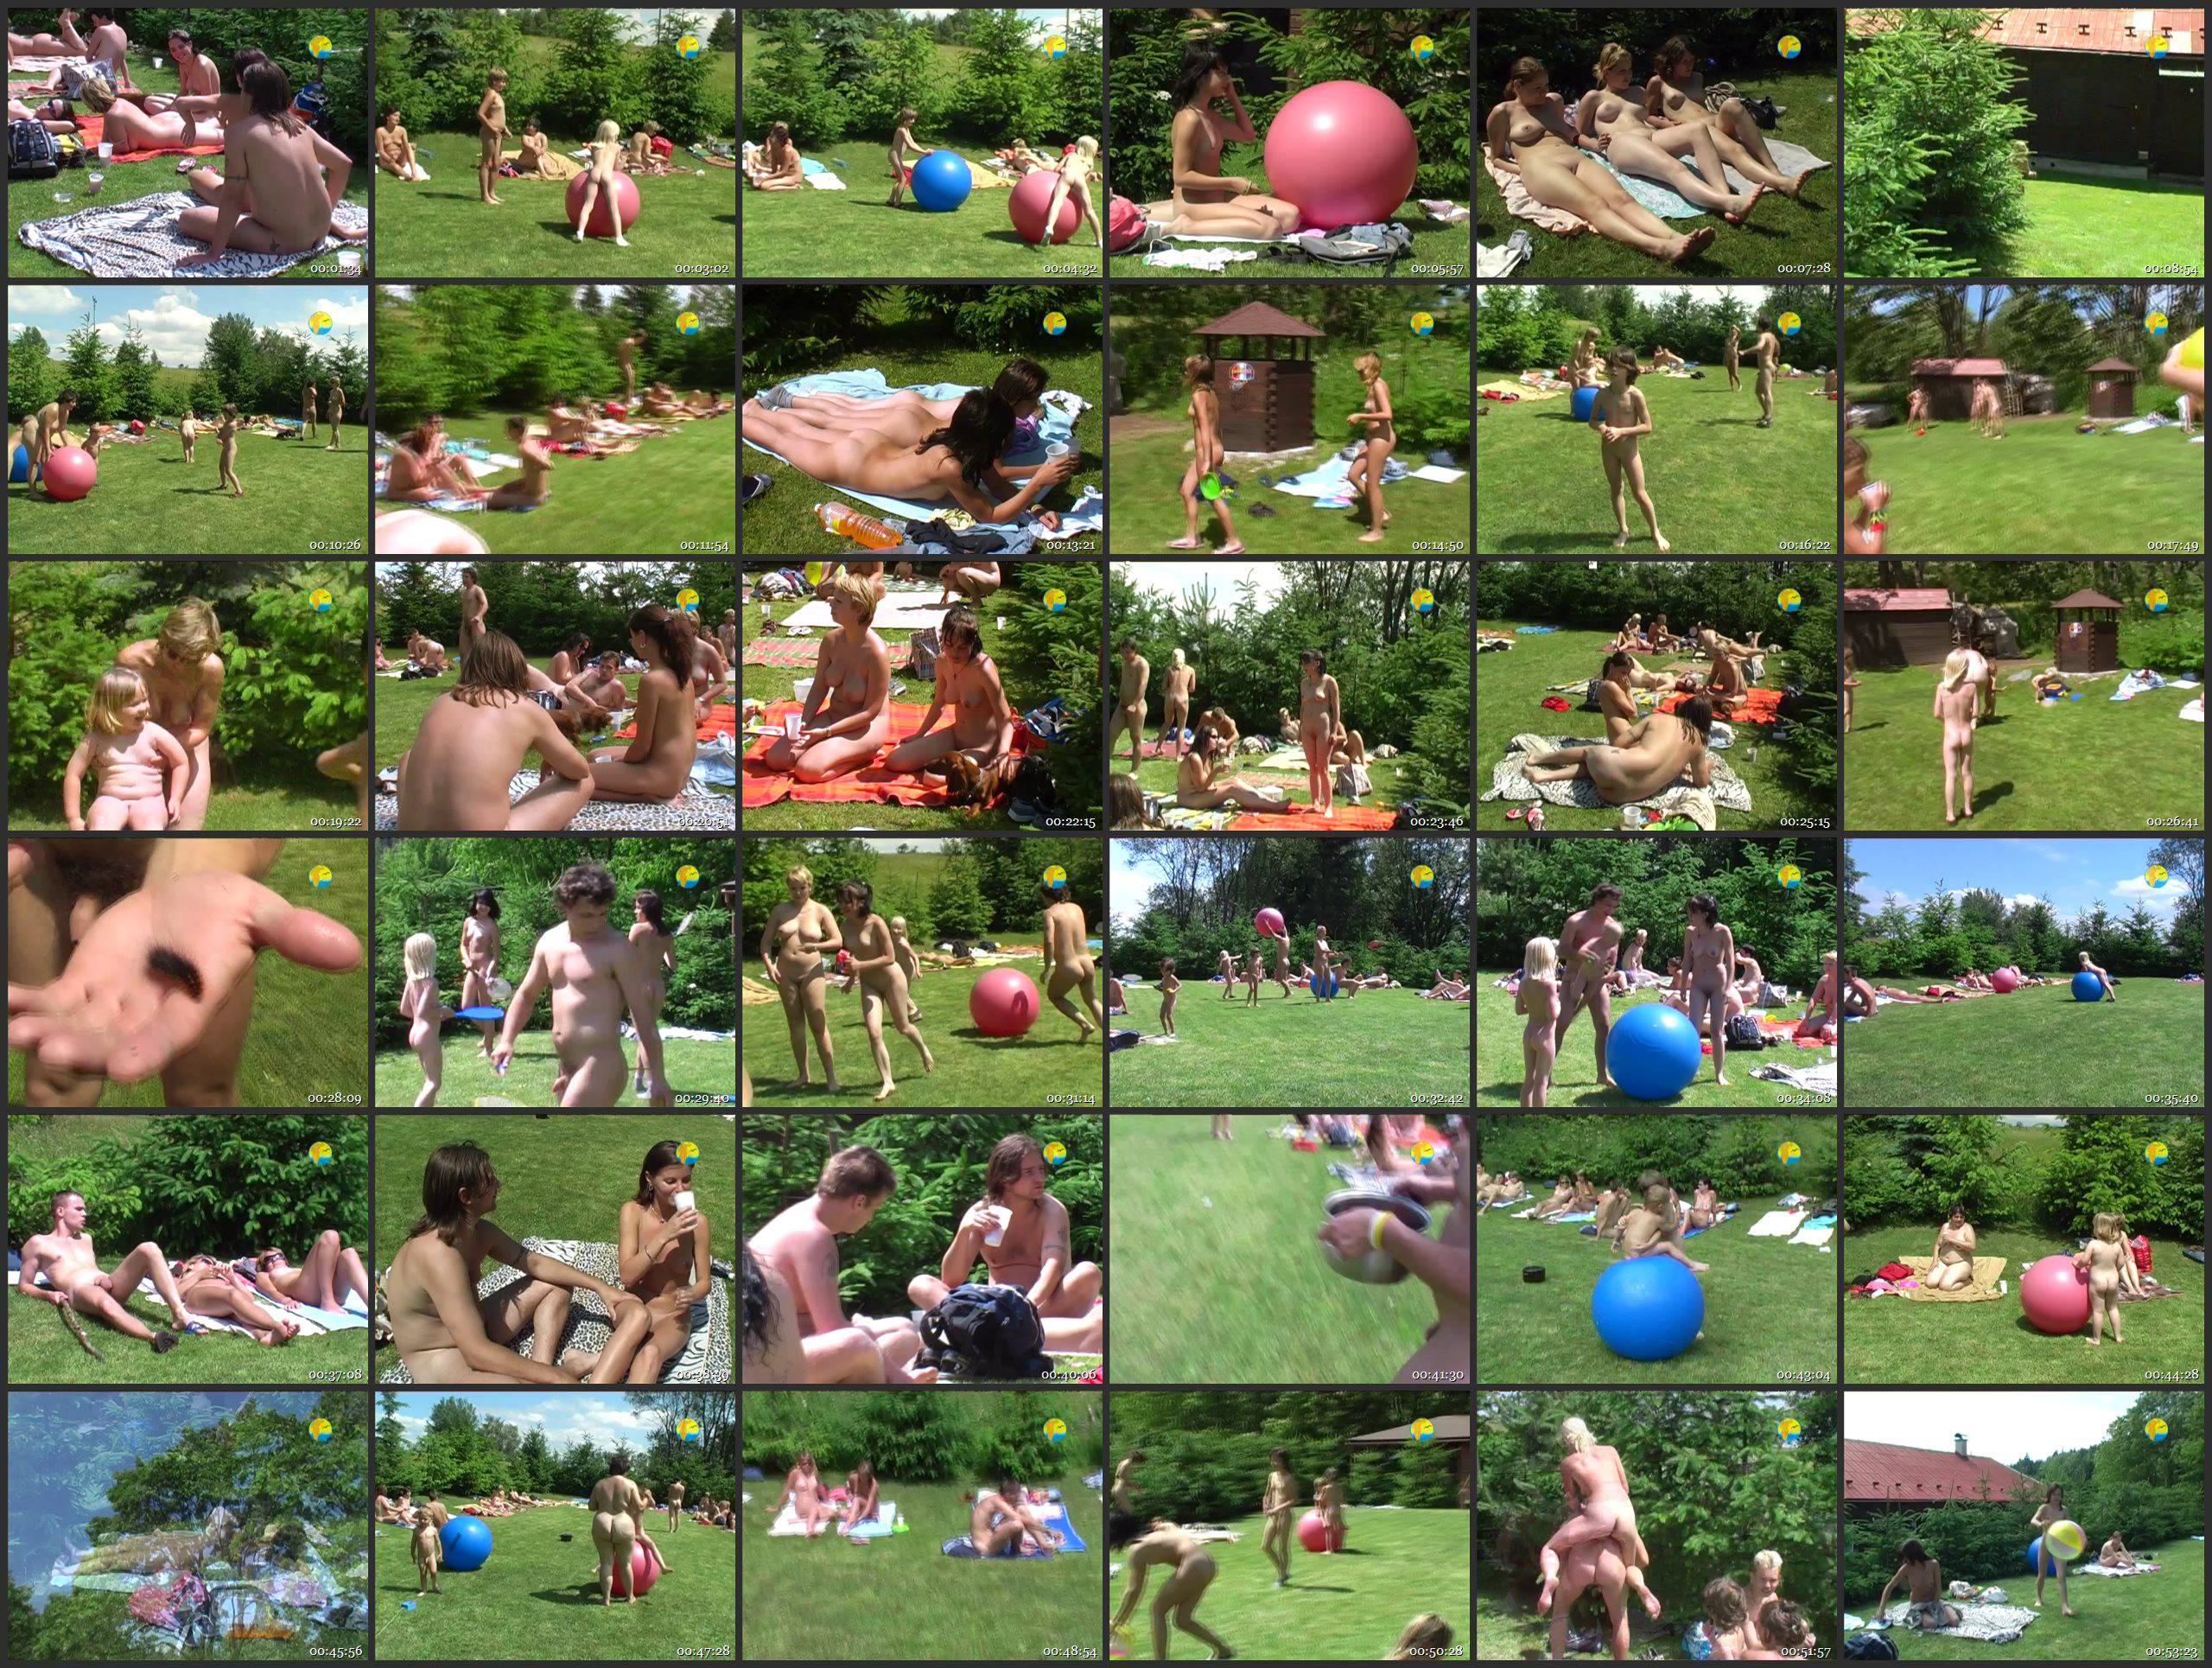 Naturist Freedom You can never get enough Sunbathing - Thumbnails